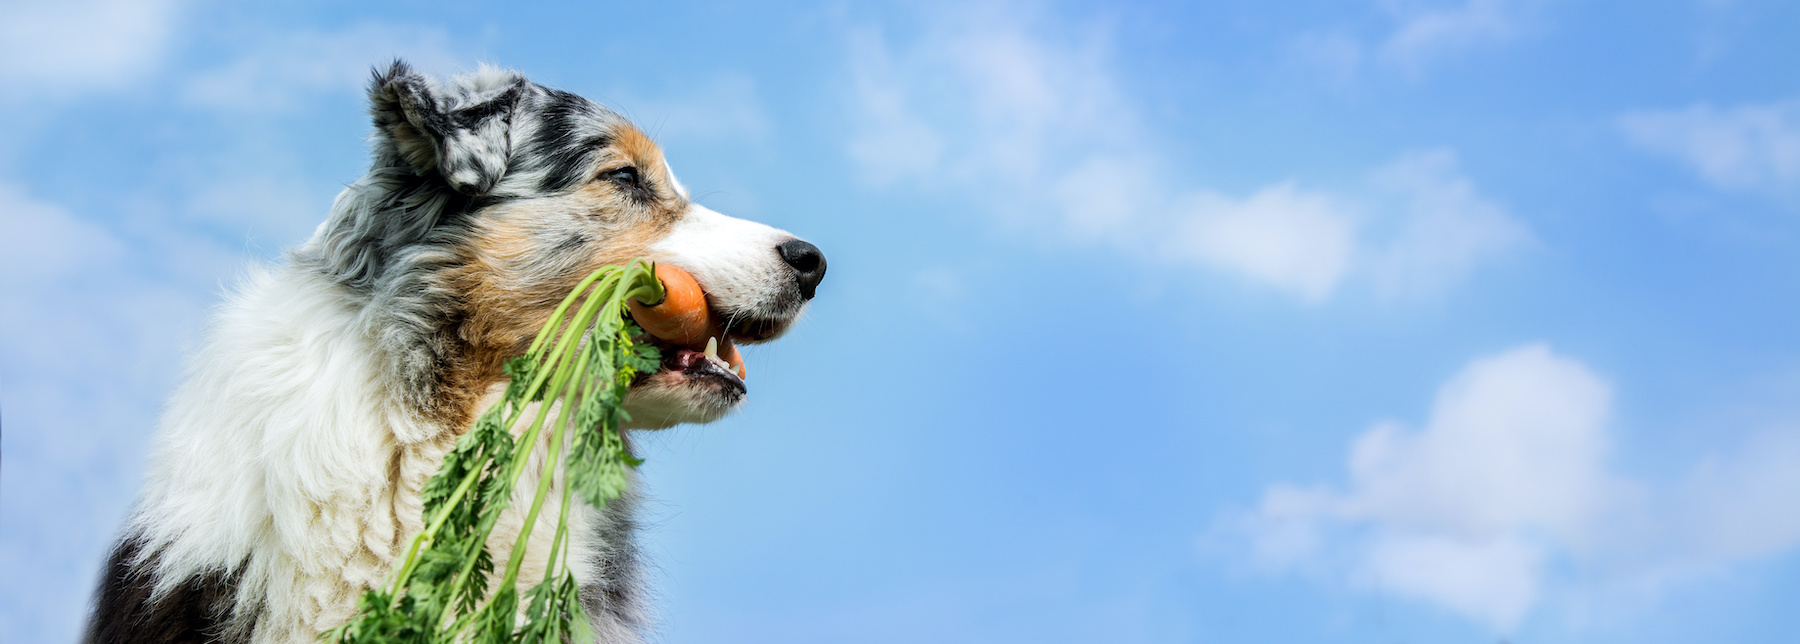 A dog with a carrott in its mouth on a bright blue sky.